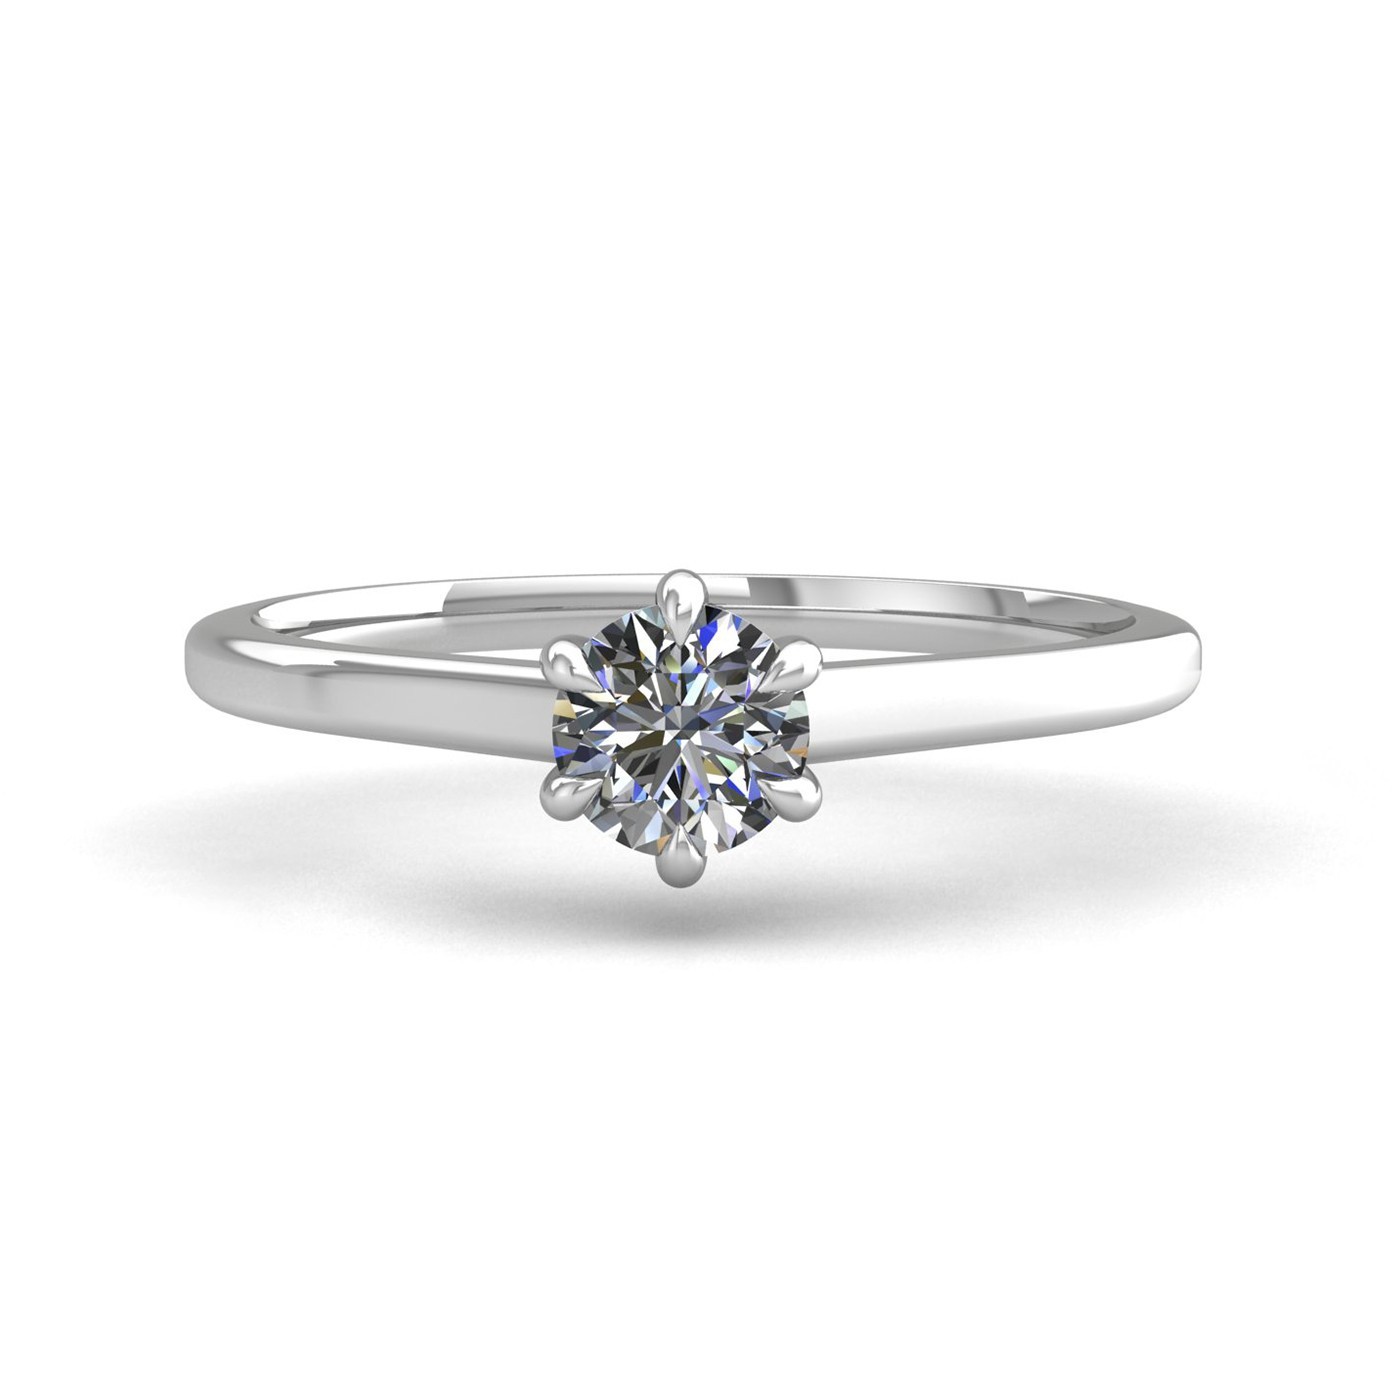 18k white gold  2,00 ct 6 prongs solitaire round cut diamond engagement ring with whisper thin band Photos & images